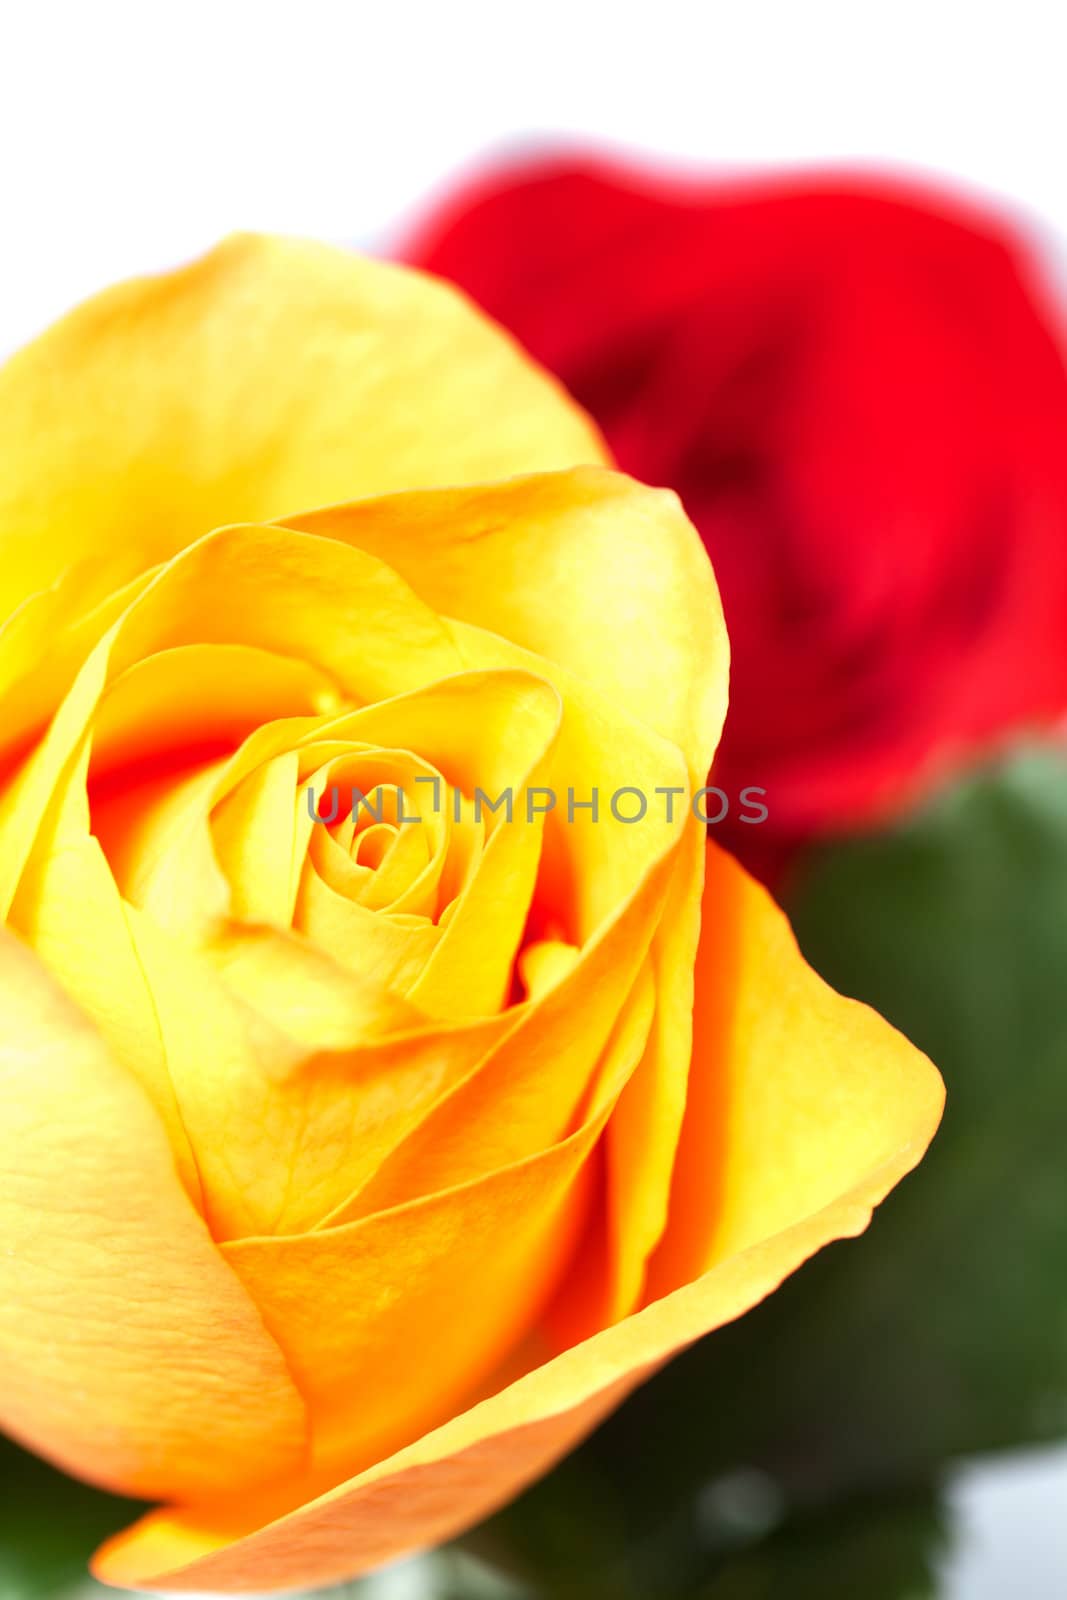 bouquet of colorful roses isolated on white by jannyjus